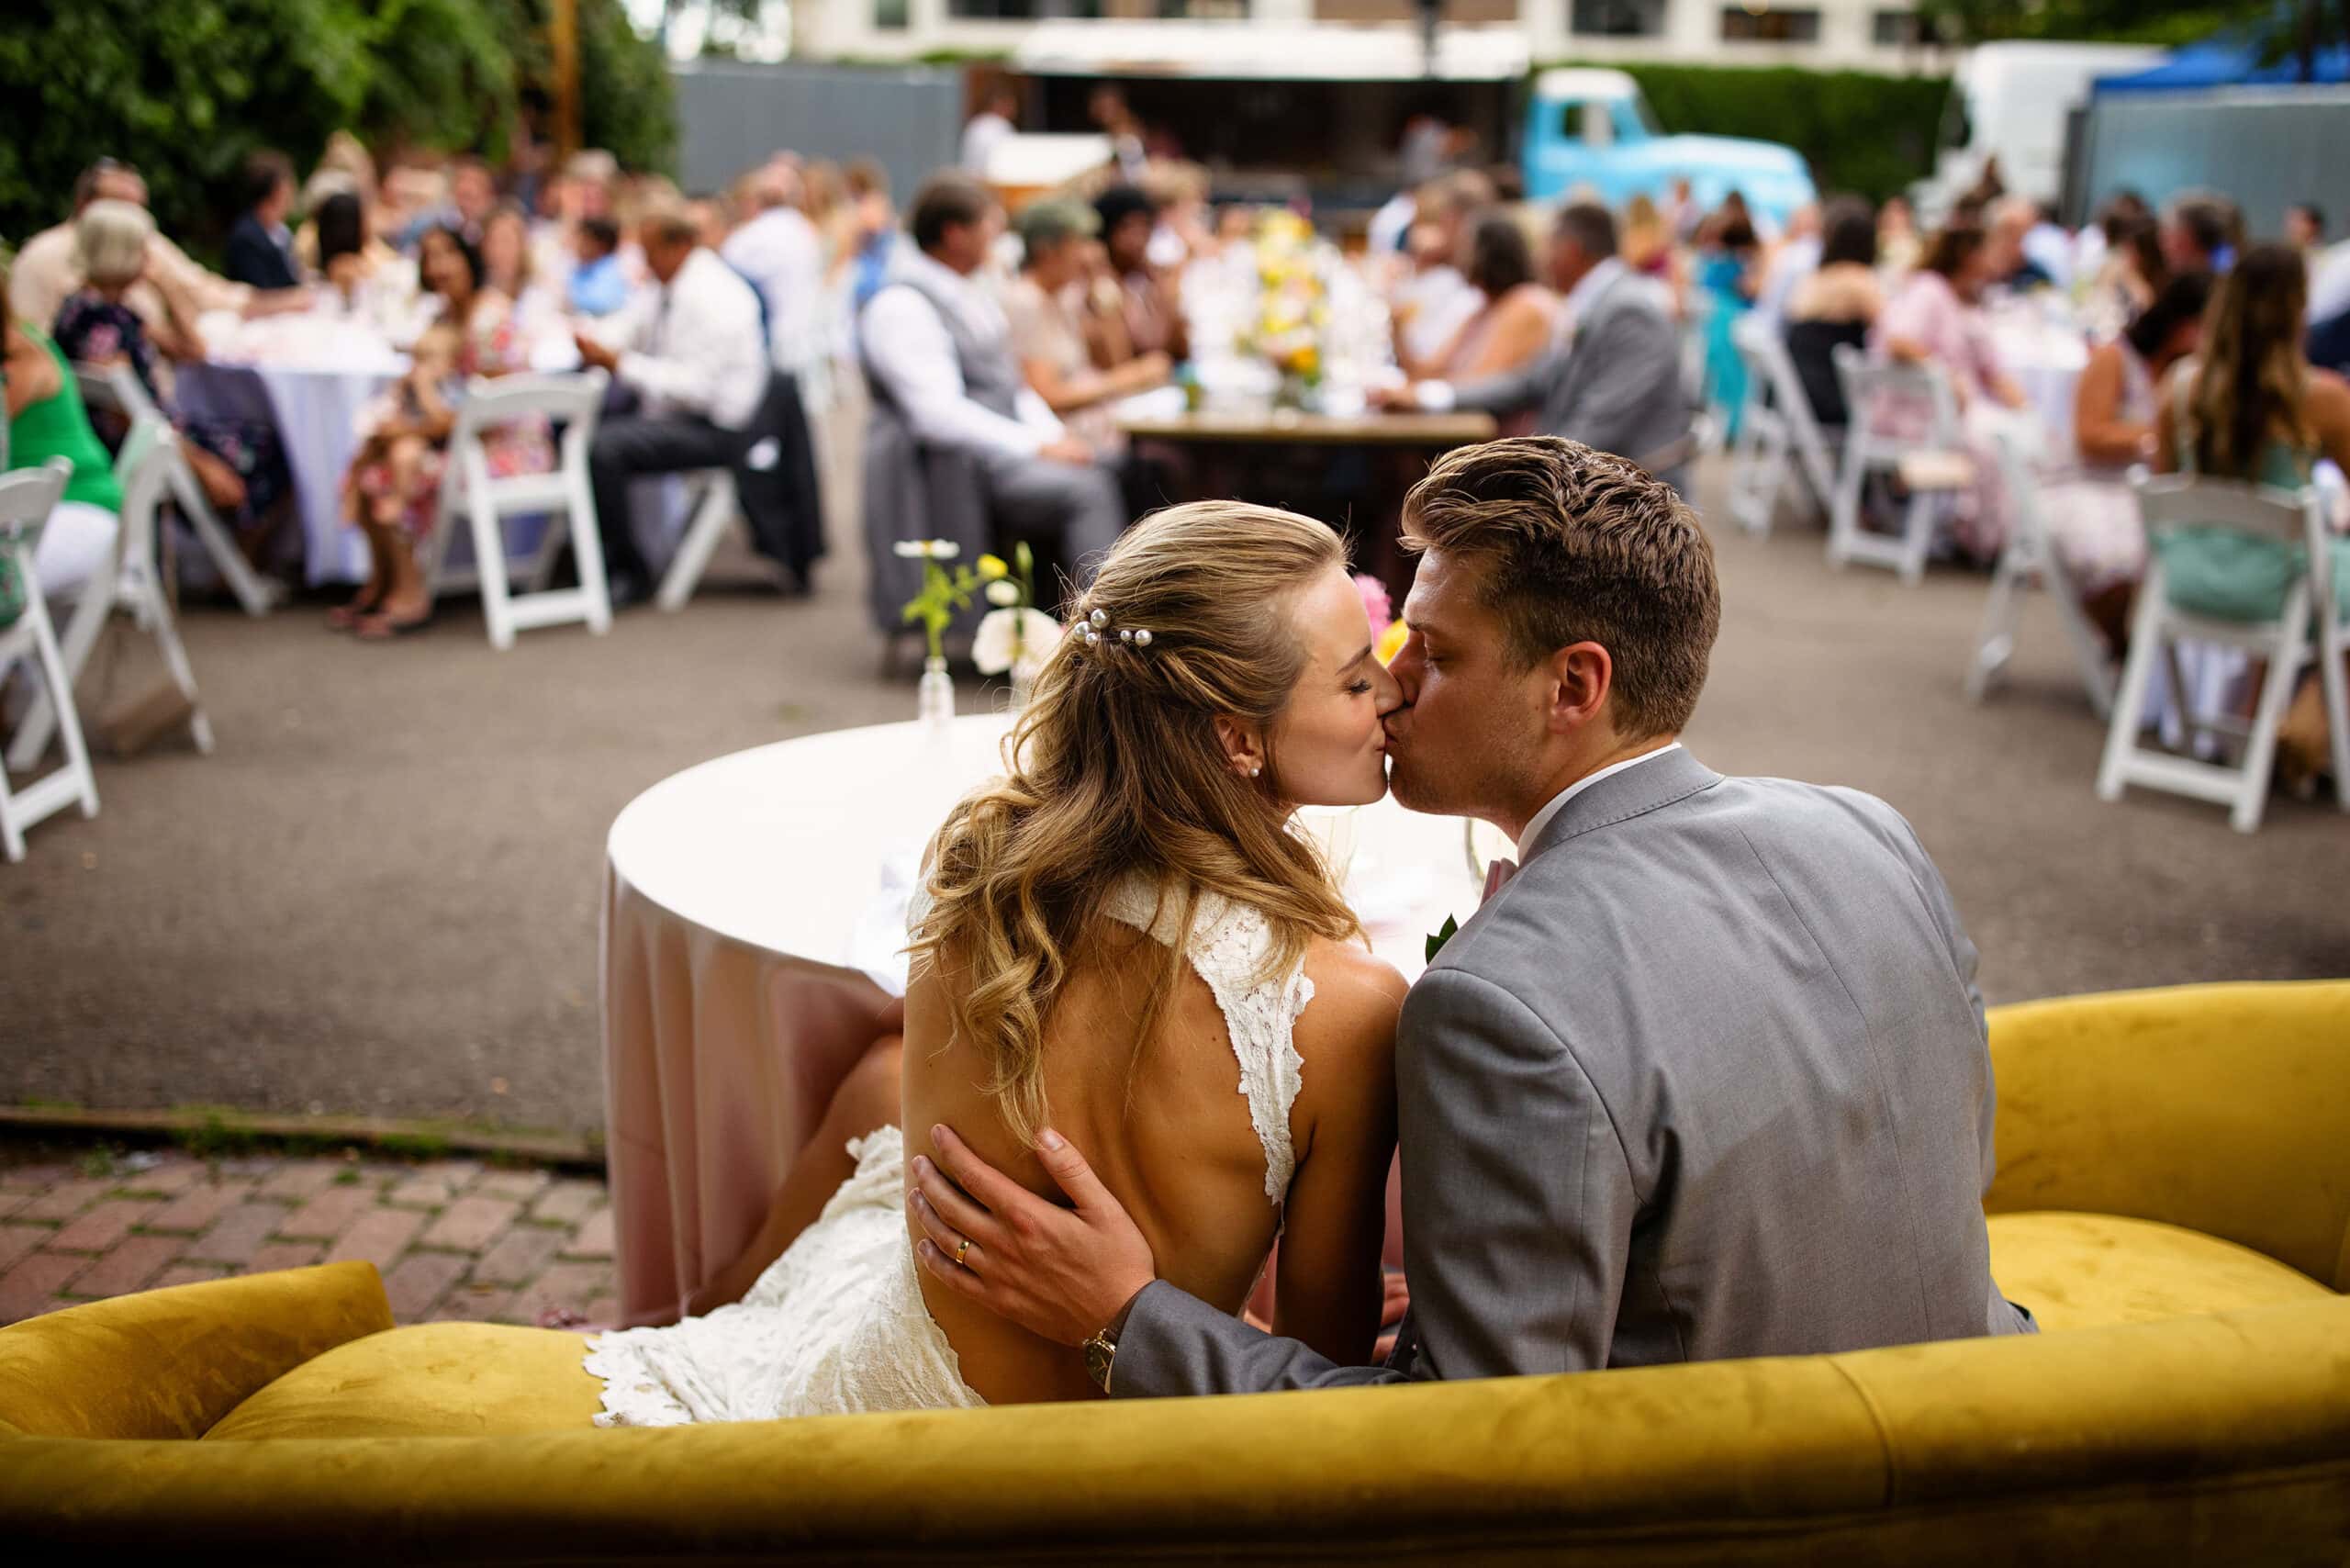 The newlyweds share a kiss from their sweetheart table during the reception